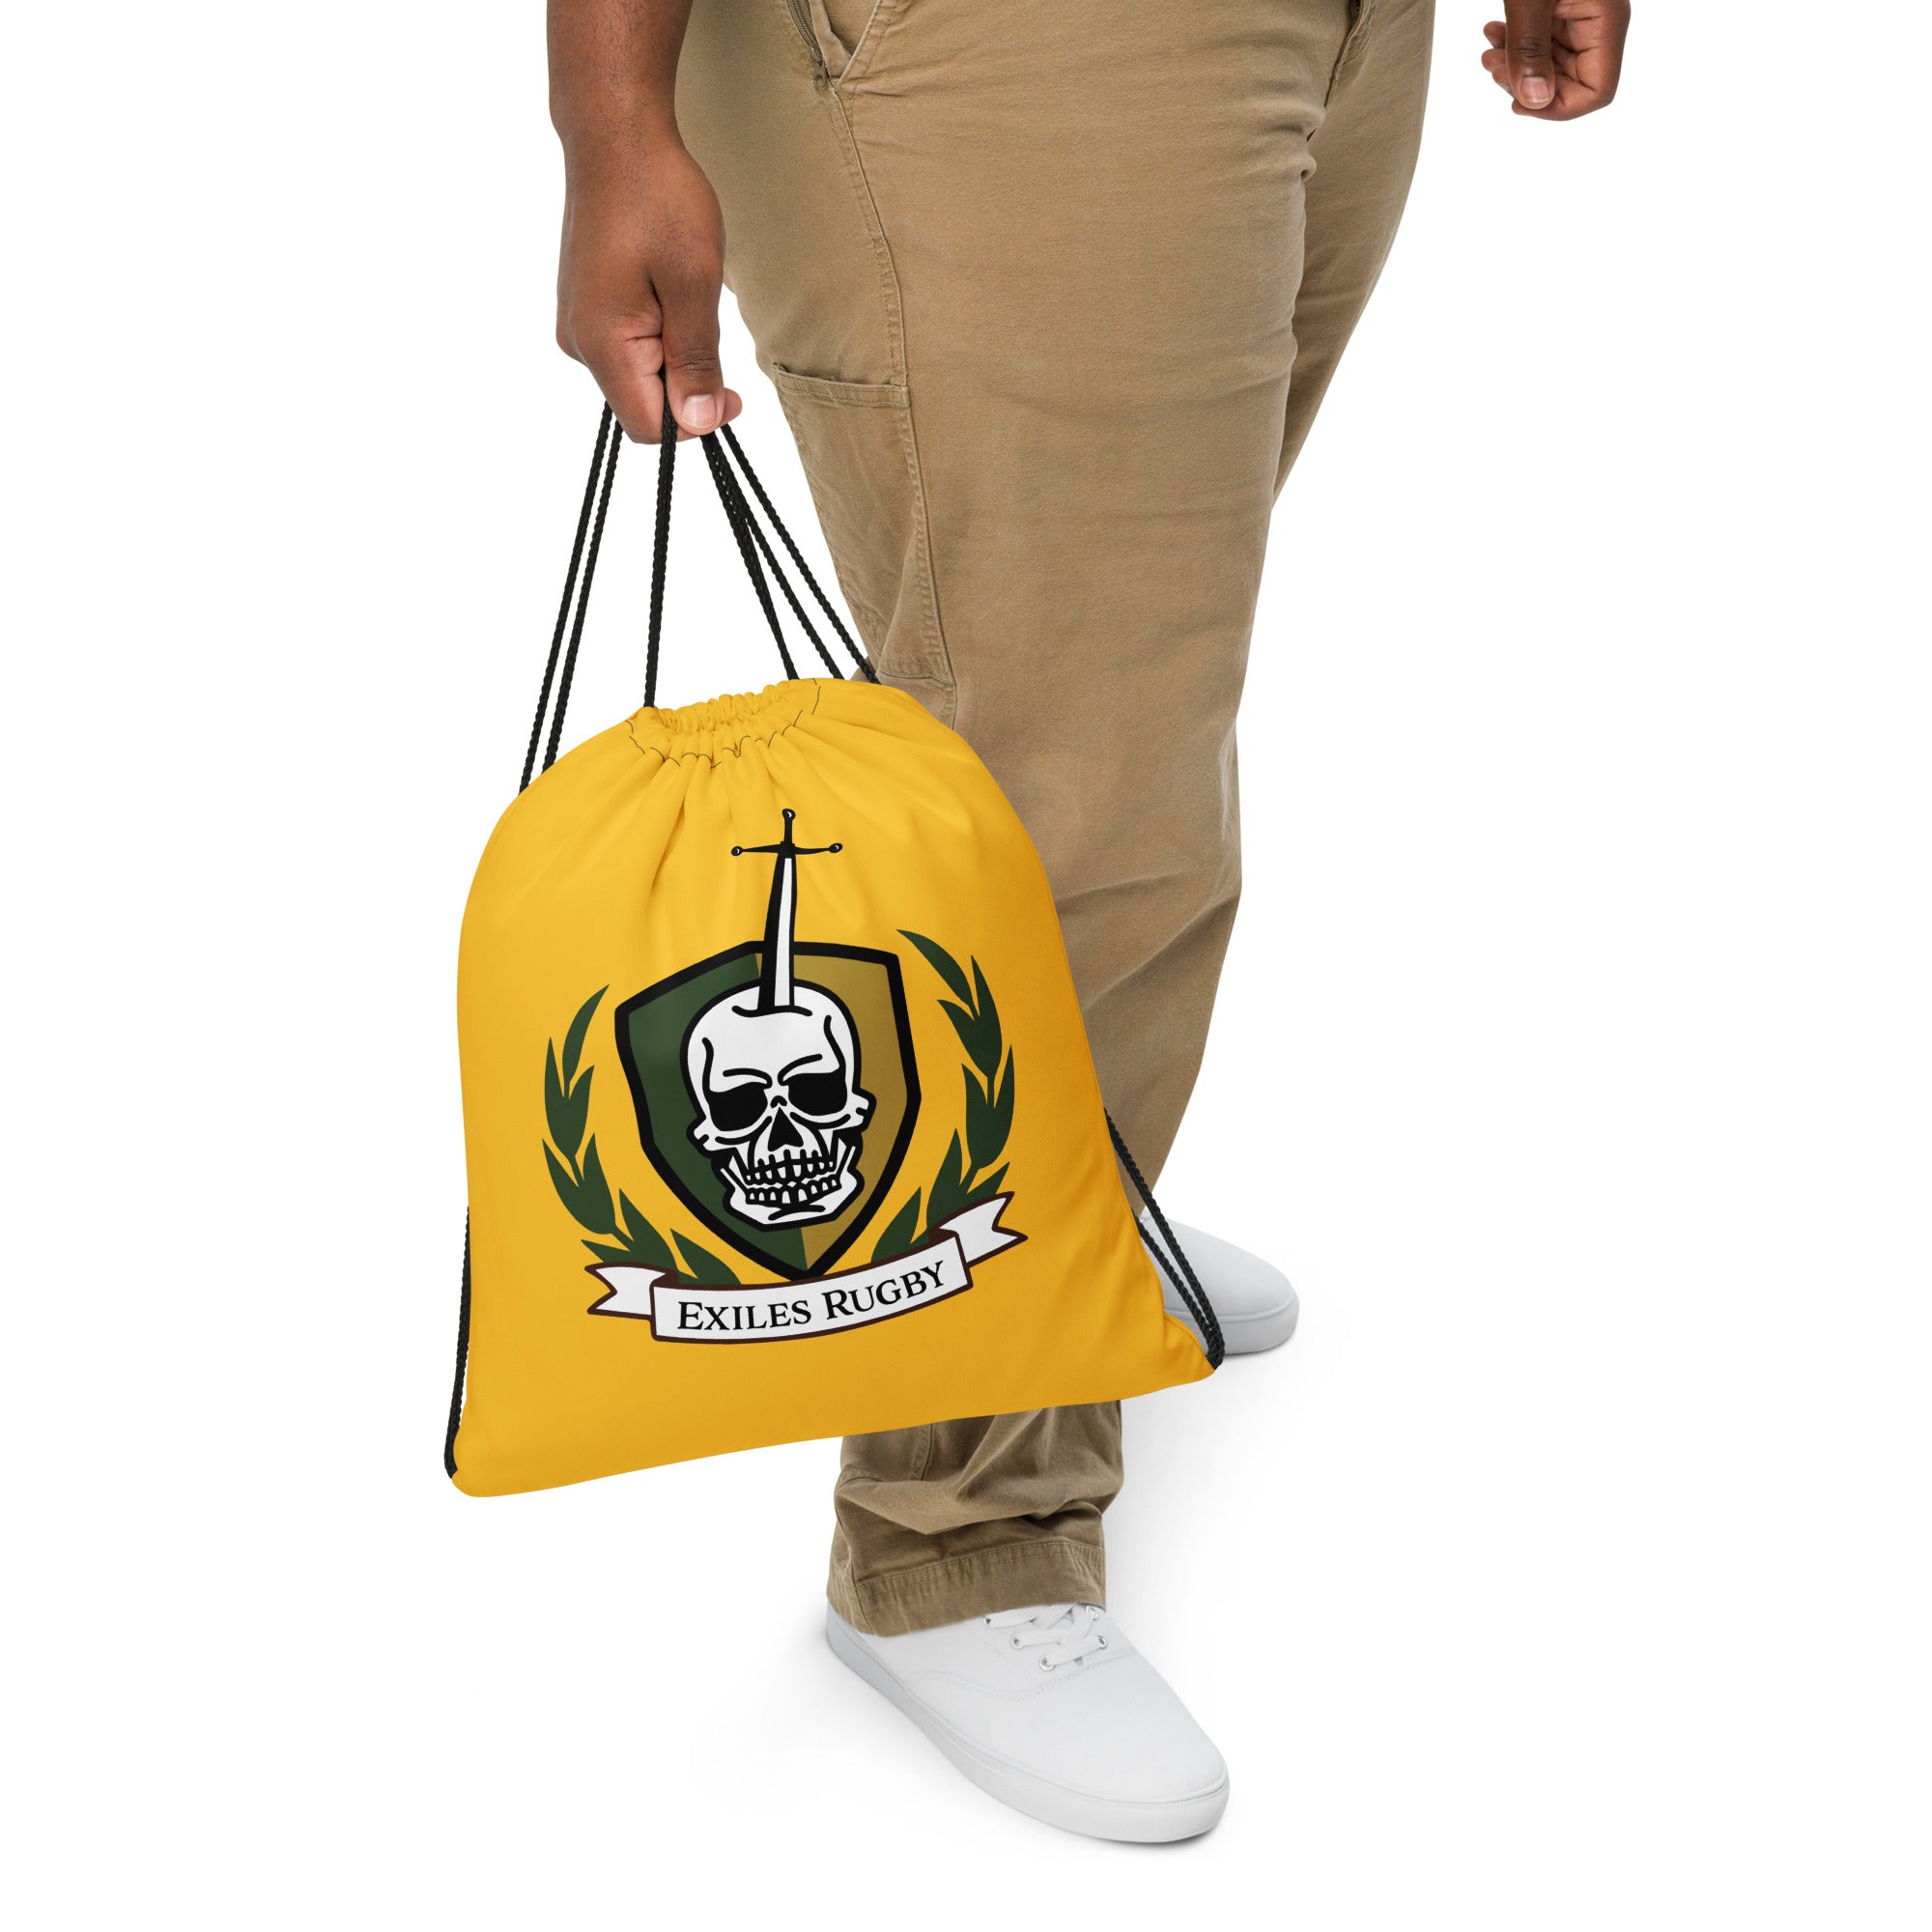 Rugby Imports Drawstring bag